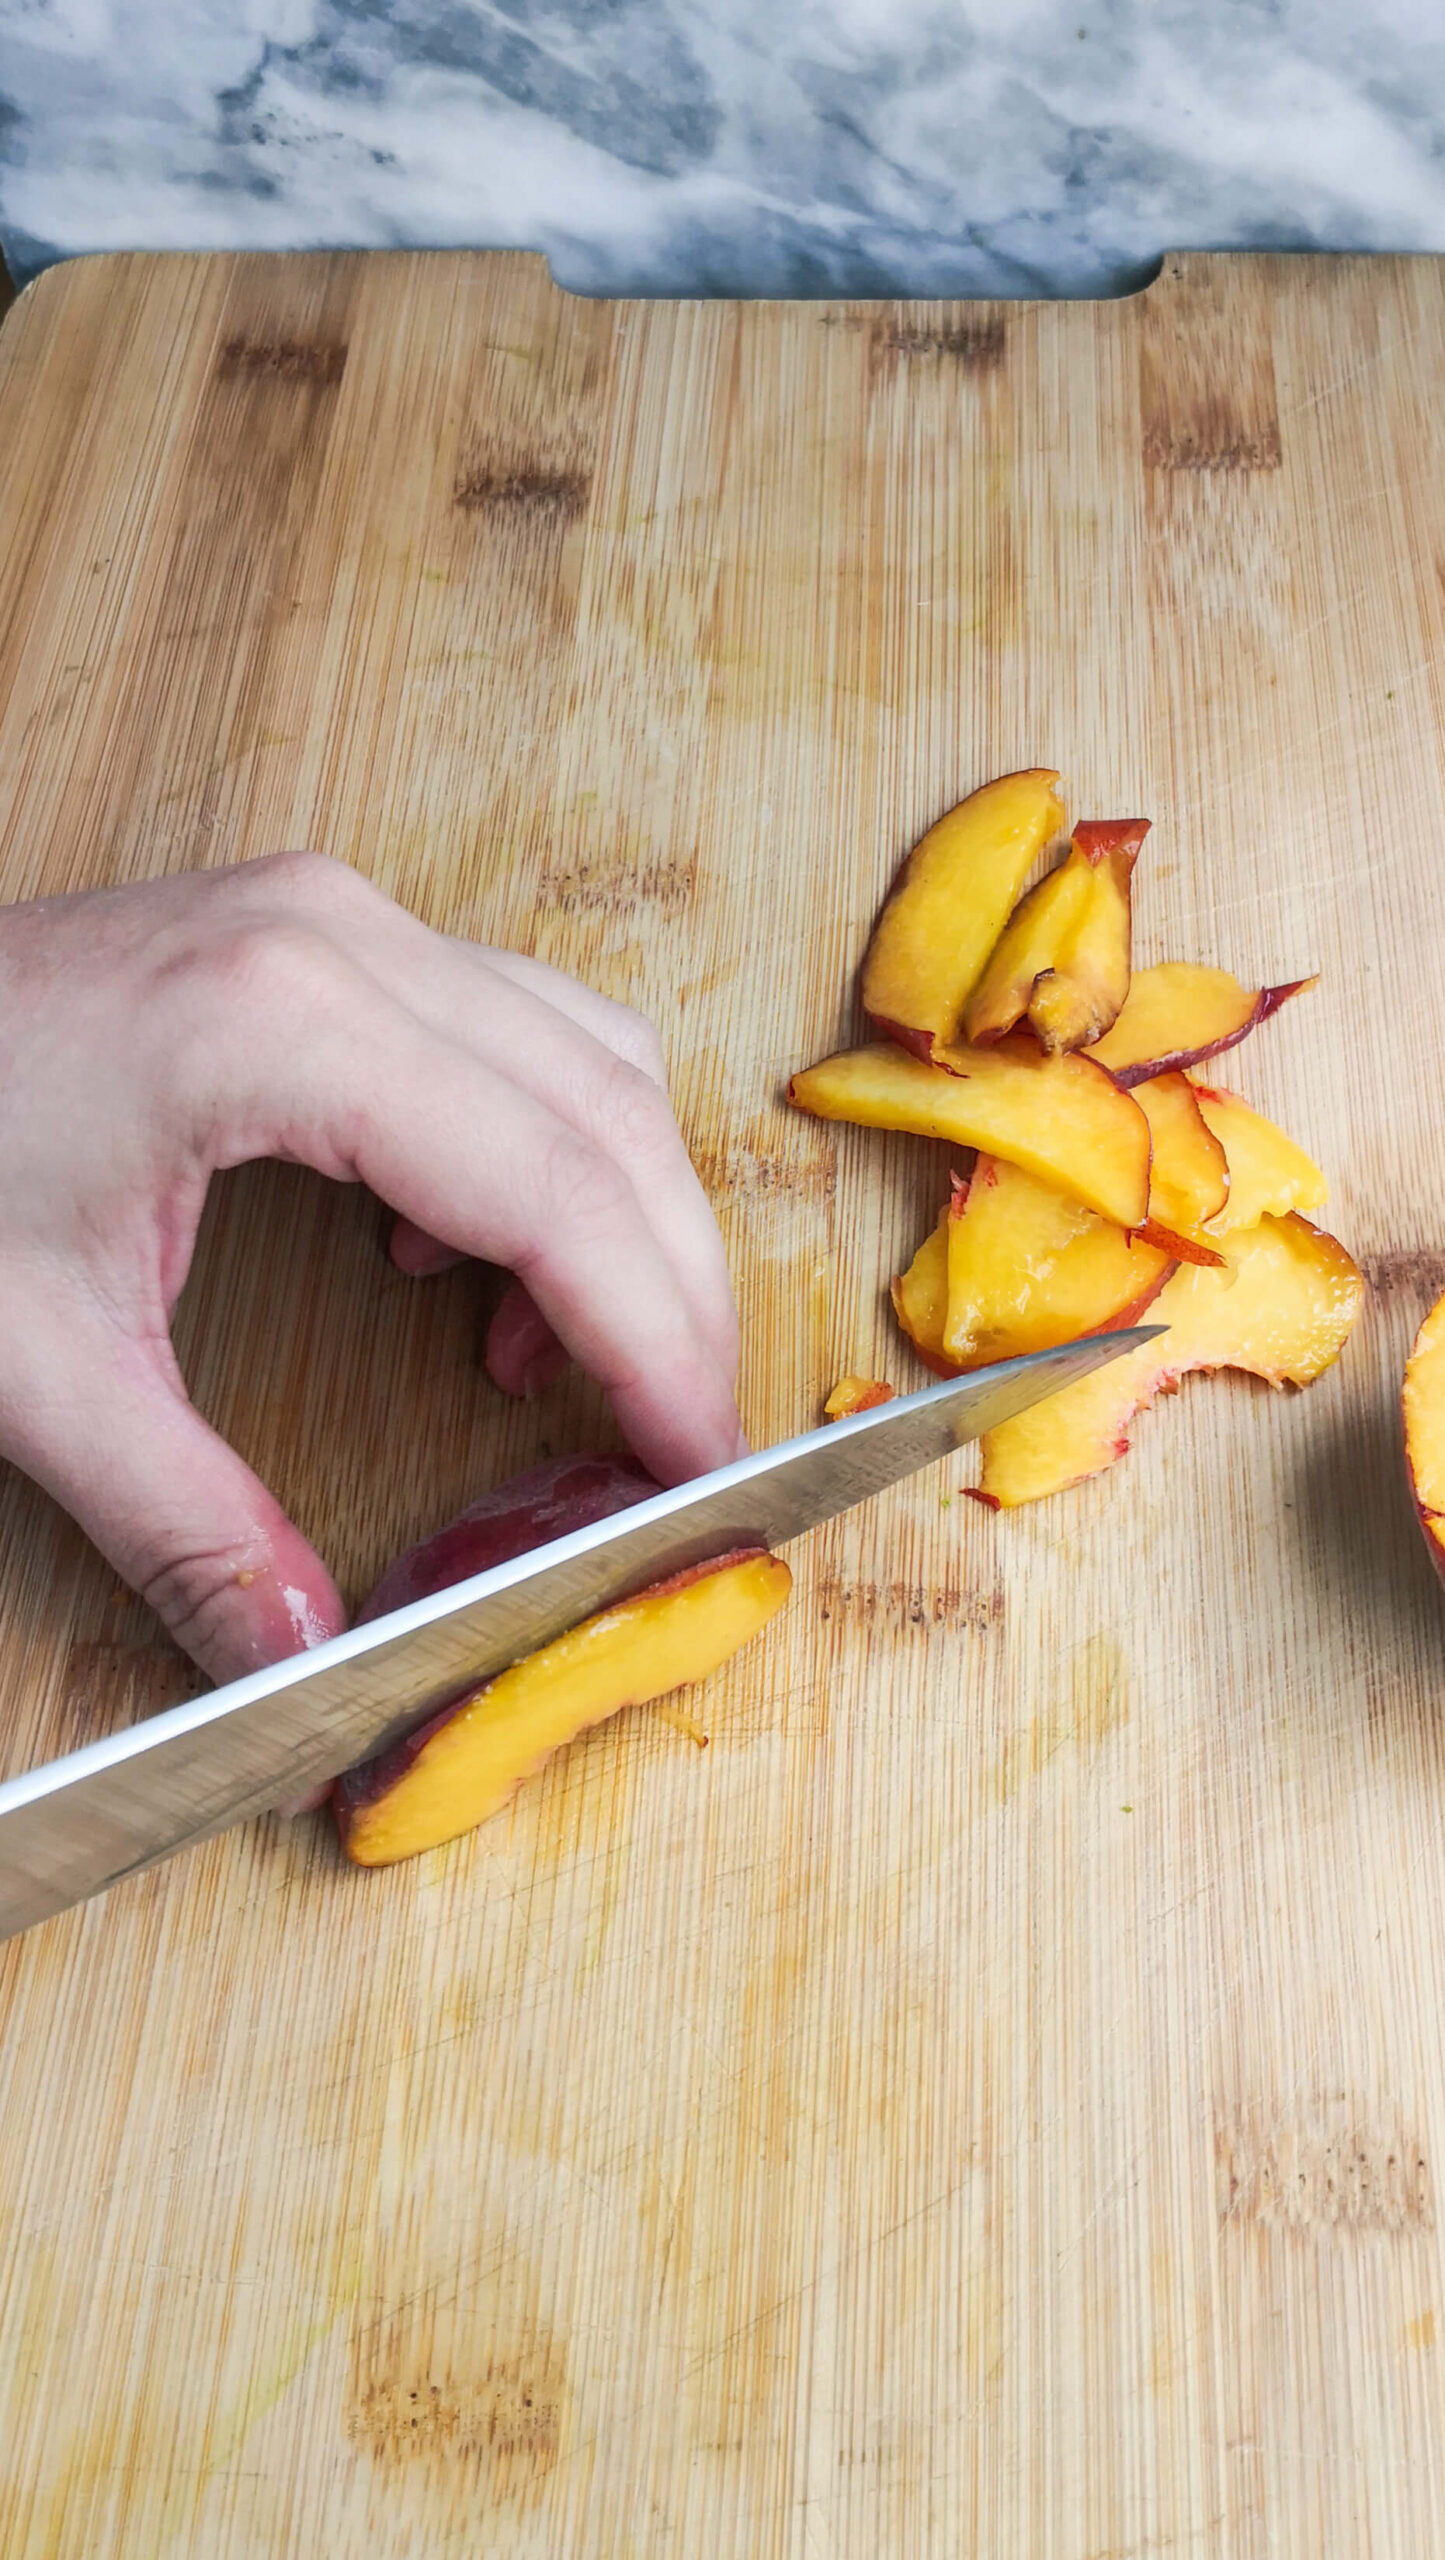 Slicing a peach thinly with a large knife on a wooden board.